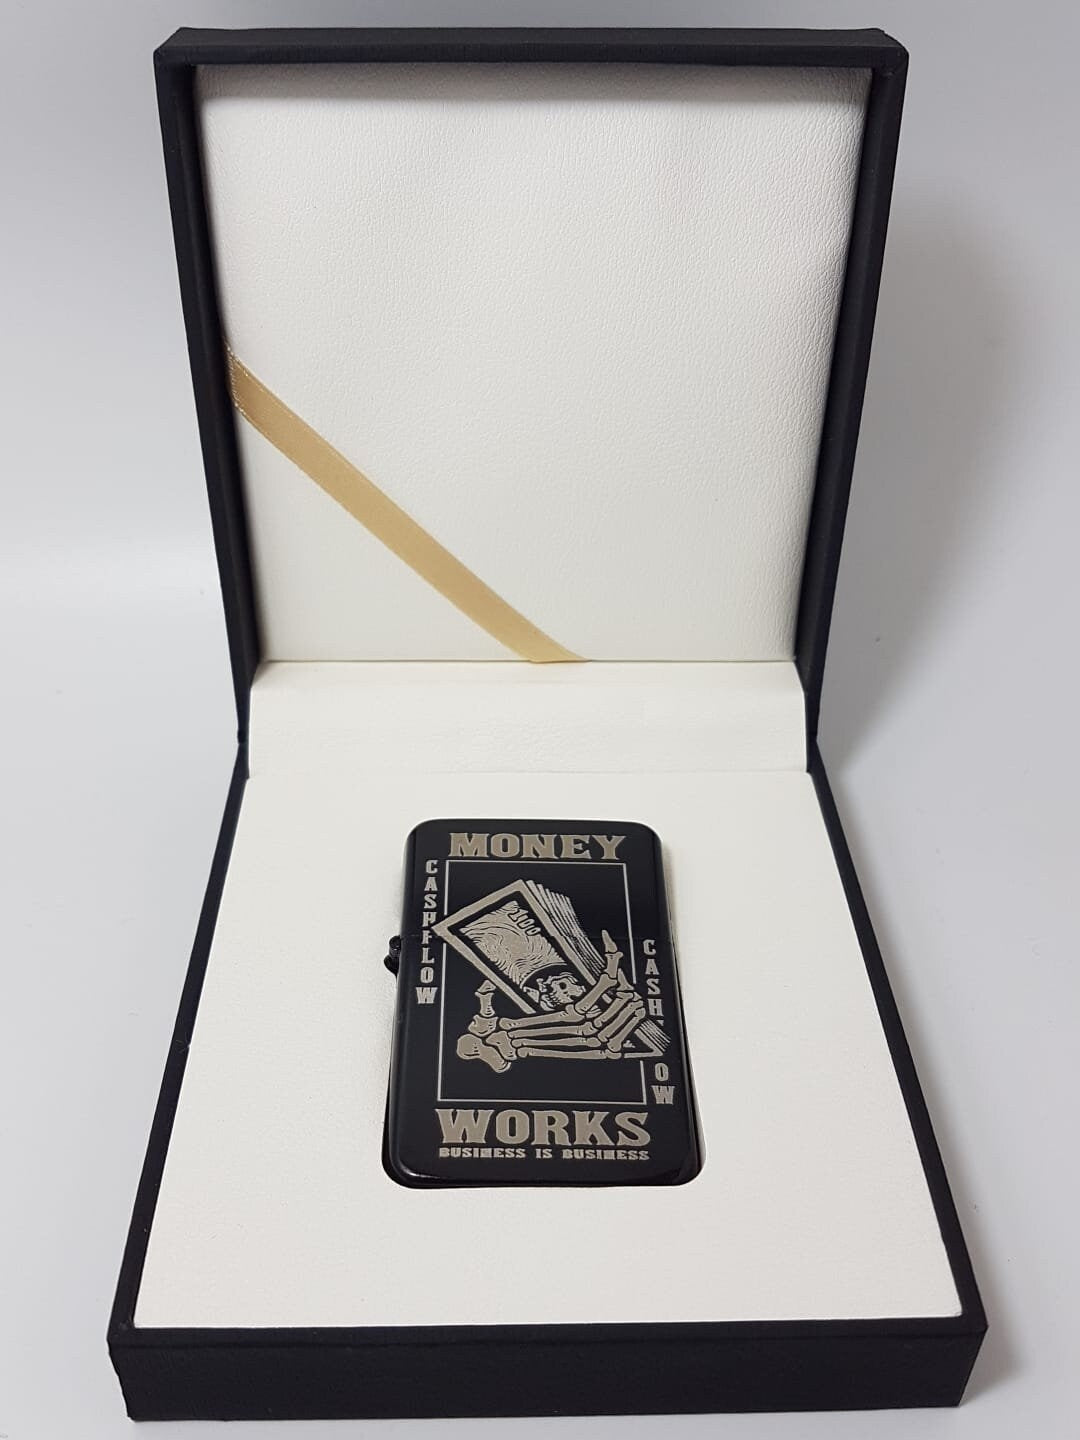 Engraved Personalised Windproof Oil Lighter in Luxury Gift Box, Perfect for Any Occasion